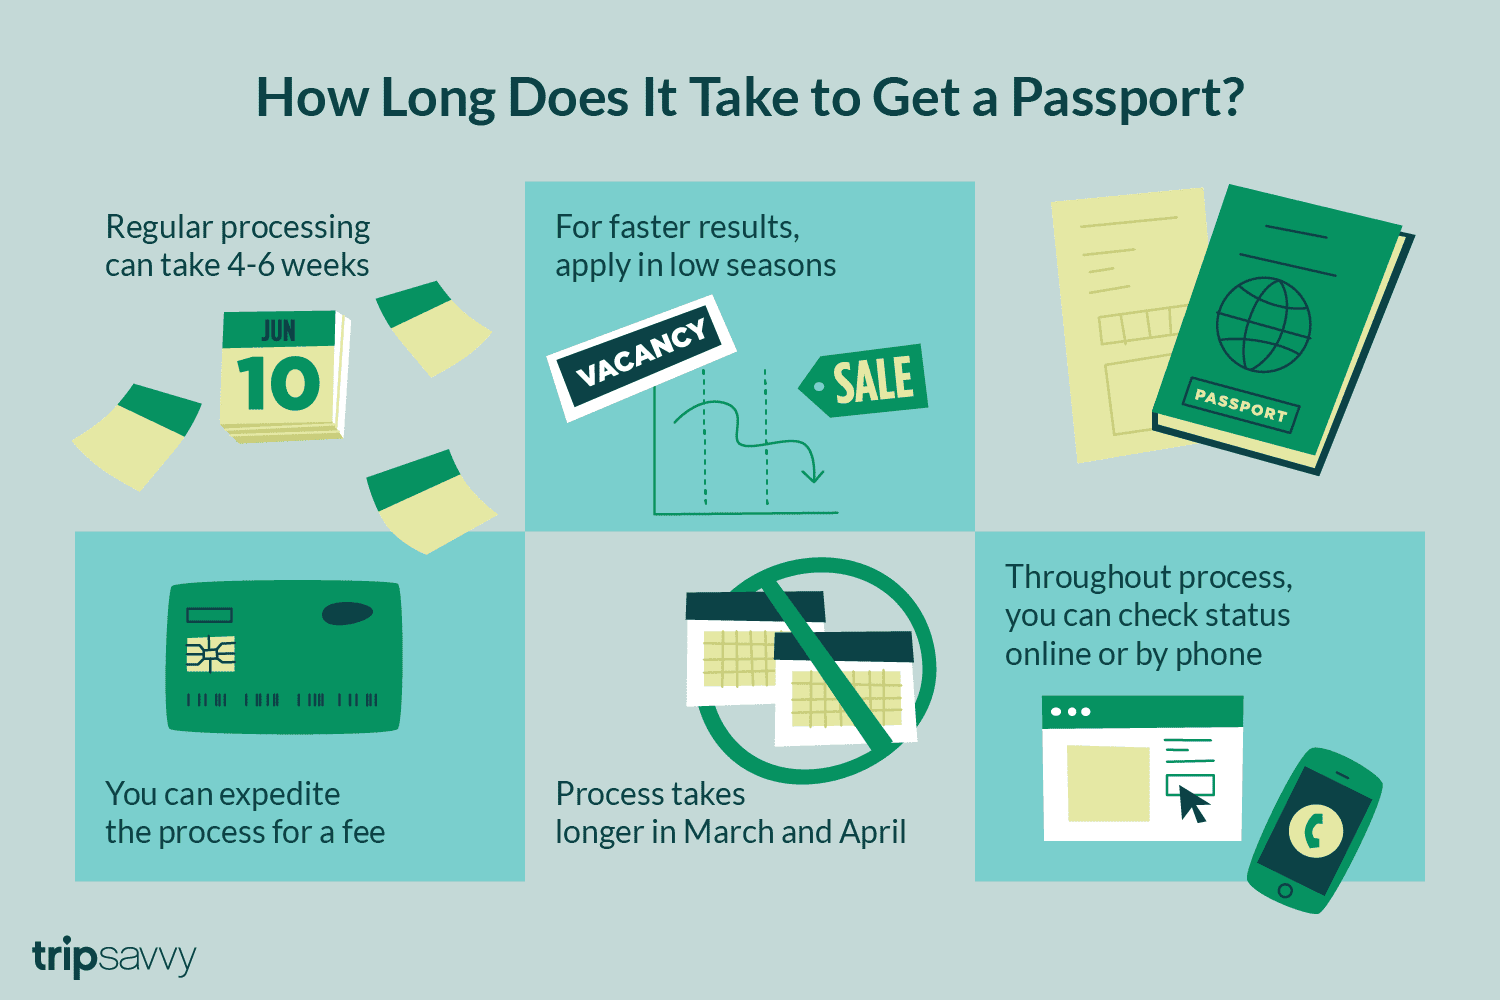 How long does it take to renew a passport in nj